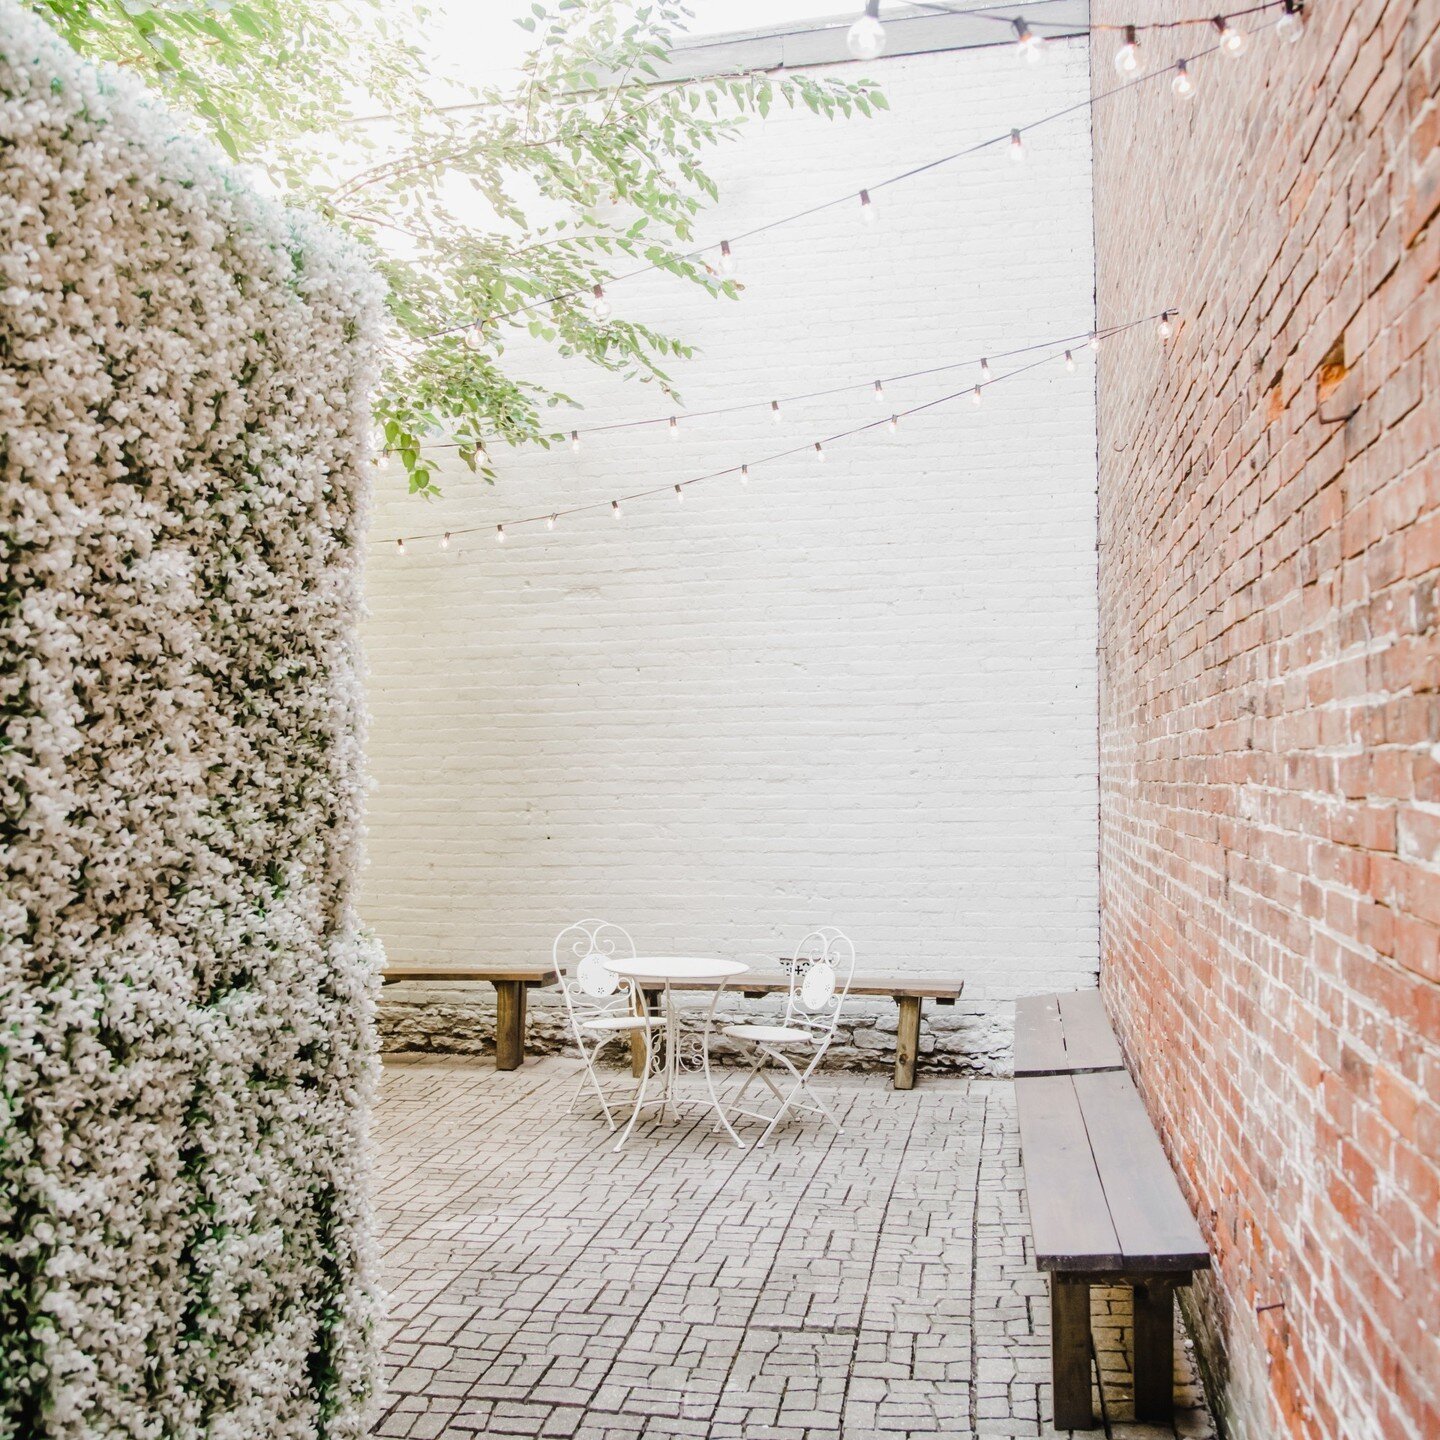 Durning the daytime the bright light shines though in our secluded back patio☀️ 
*
*
*
#ohiopartyvenue #ohioeventspace #ohioeventvenue #bridetobe #ohwedding #kywedding #cincinnatiwedding #cincyvenue #cincyeventspace #cincinnatieventvenue #cincinnatie